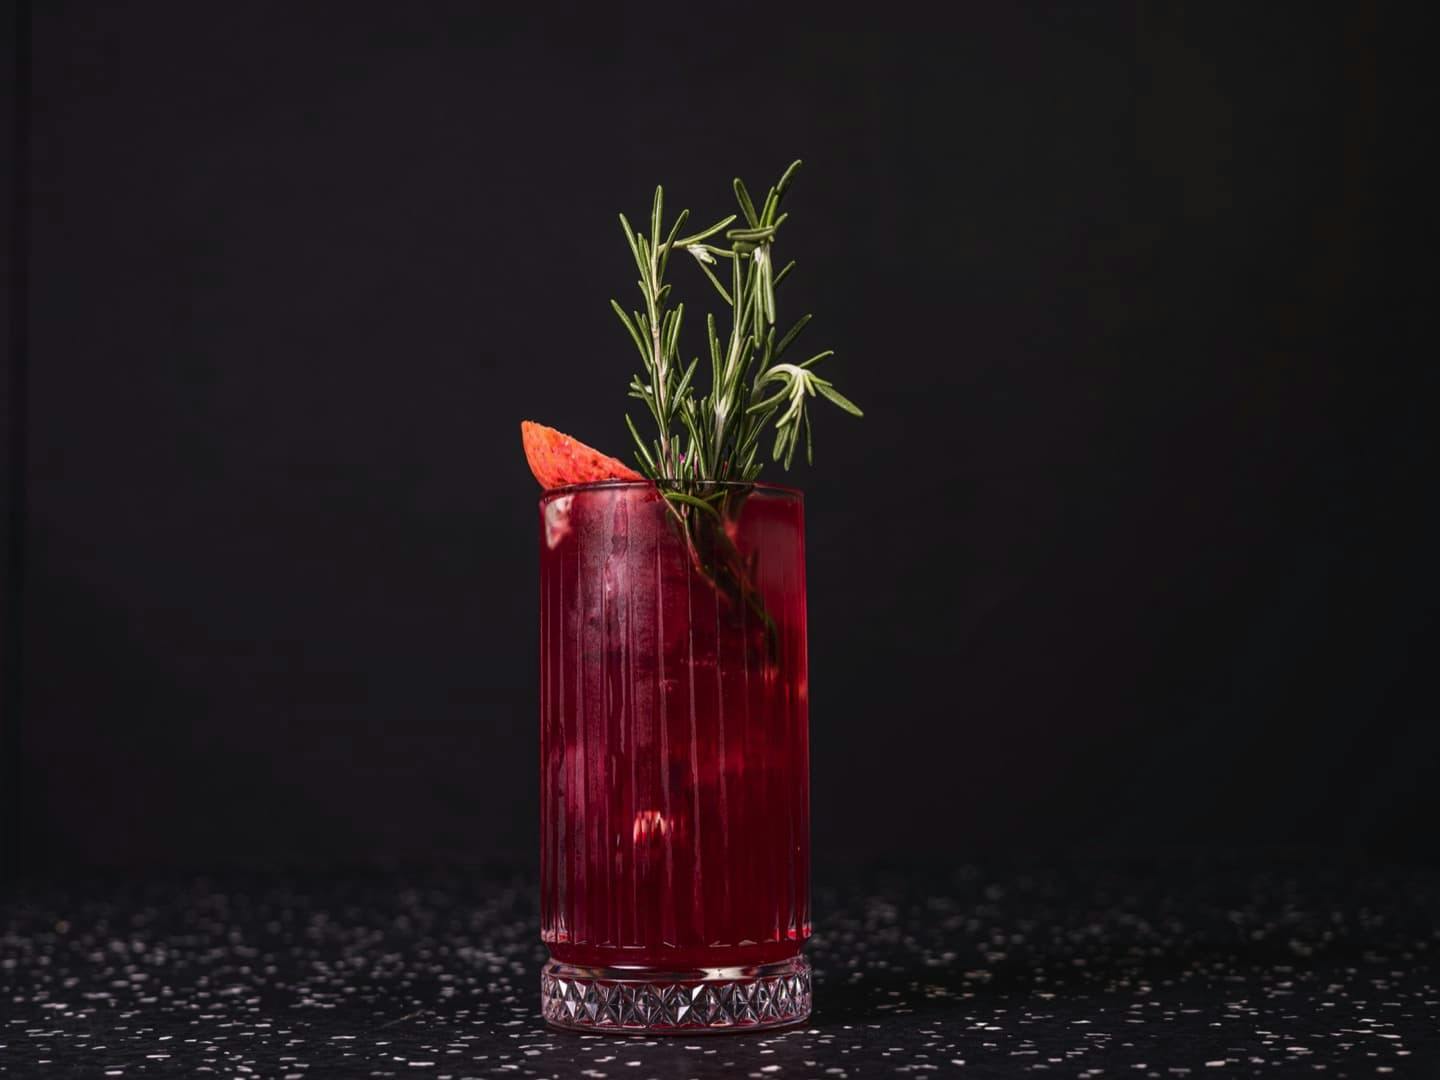 <p>The madness of bubbles combined with rosemary and pomegranate.</p>
<p>Base: Soda infused with rosemary, pomegranate puree, lemon thyme syrup</p>